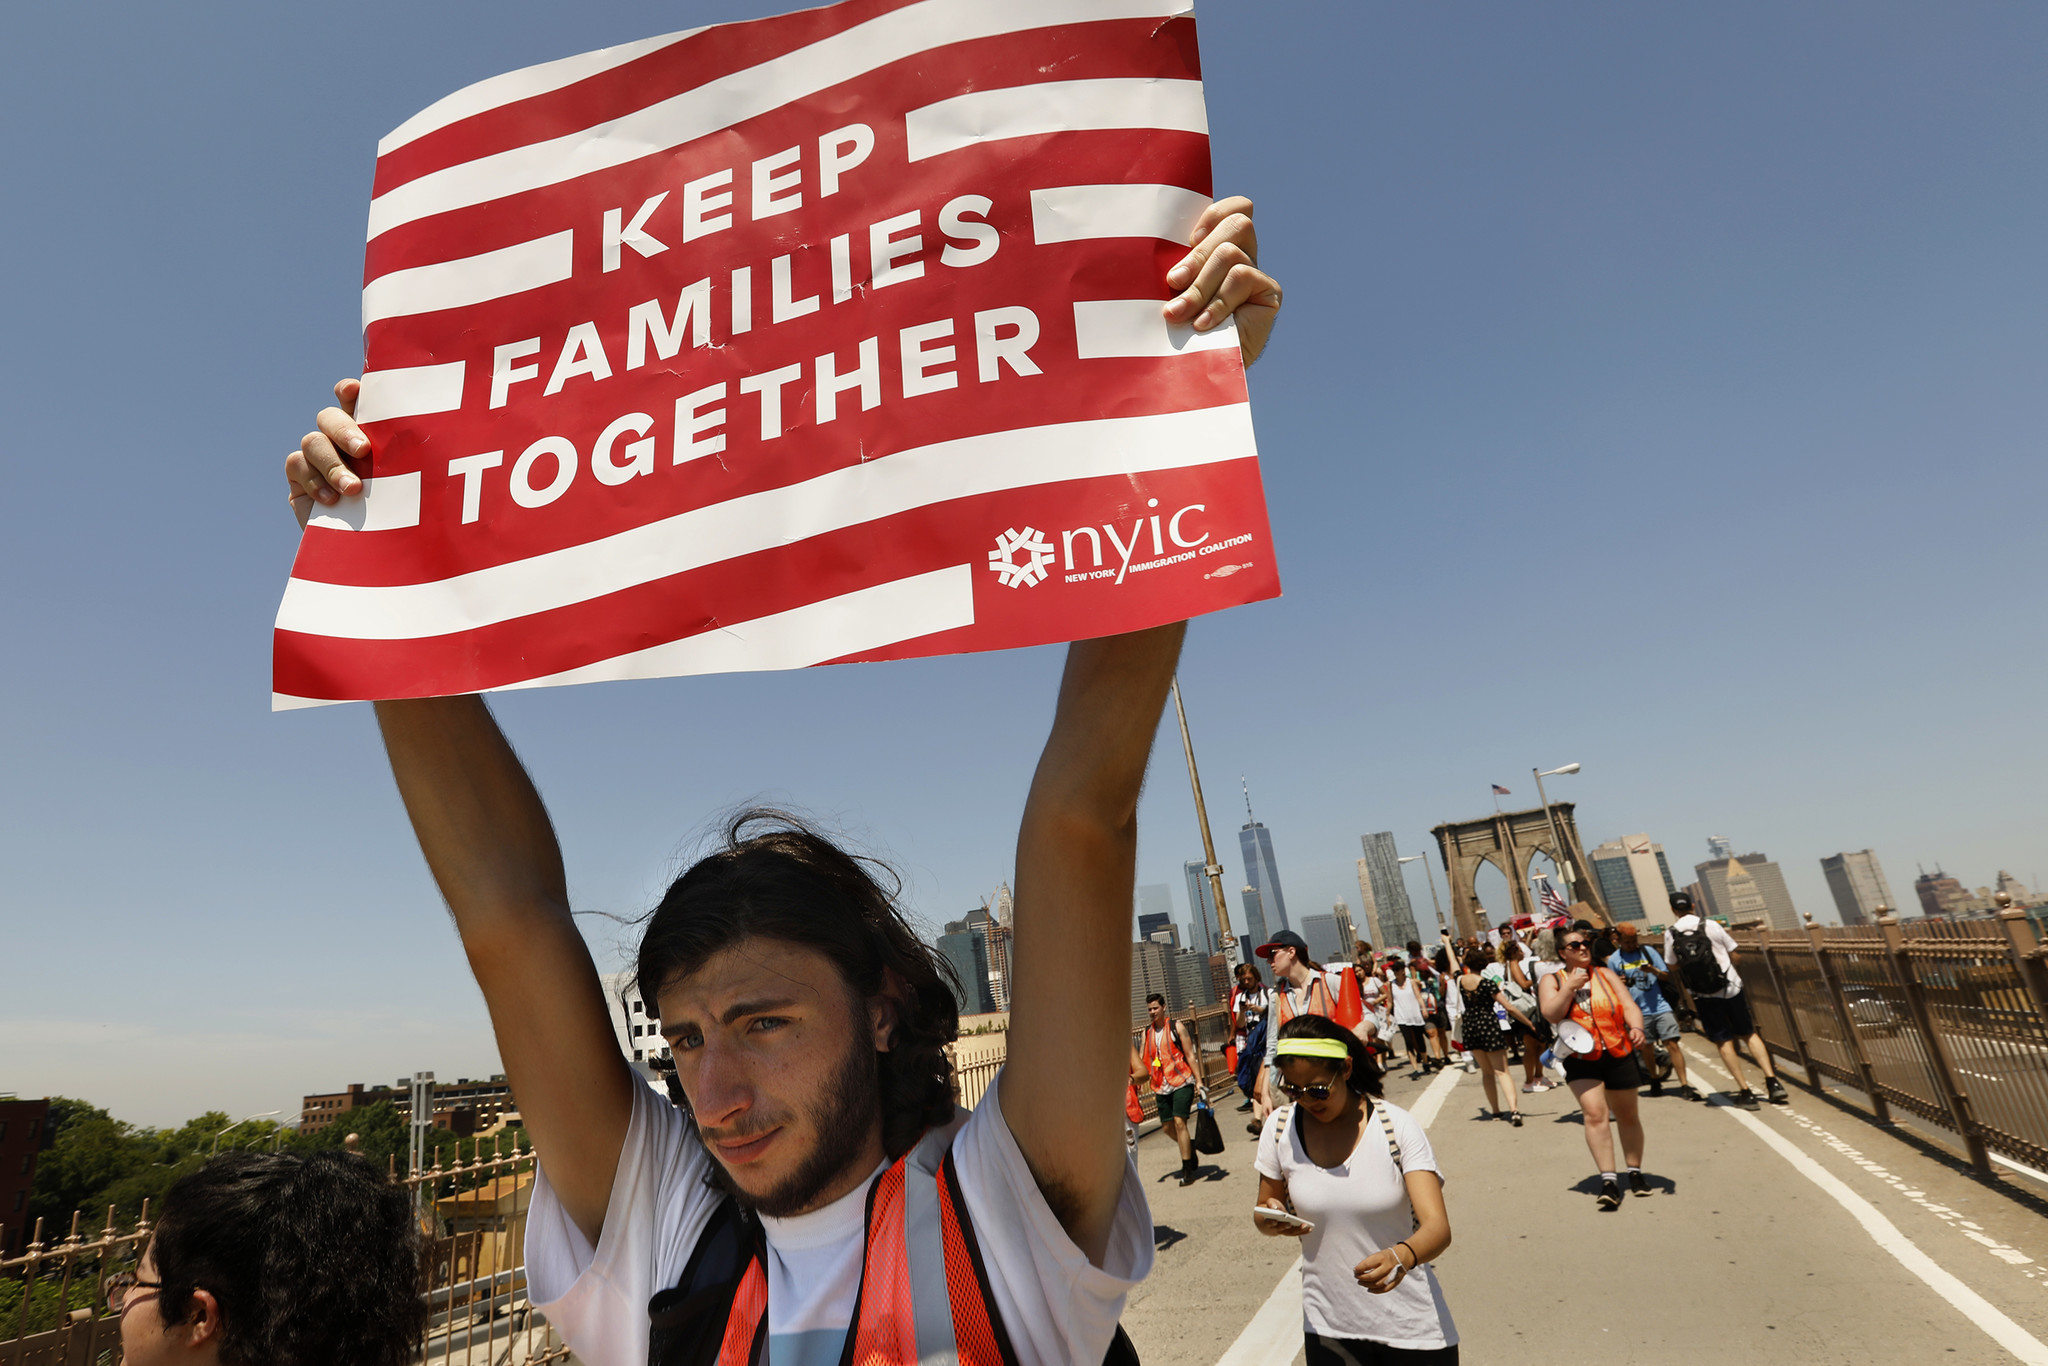 NEW YORK: Ariel Schwartz, 19, of Long Island, takes part in a march to keep families together. "I'm sick and tired of innocent families being treated like criminals," Schwartz said. Carolyn Cole / Los Angeles Times